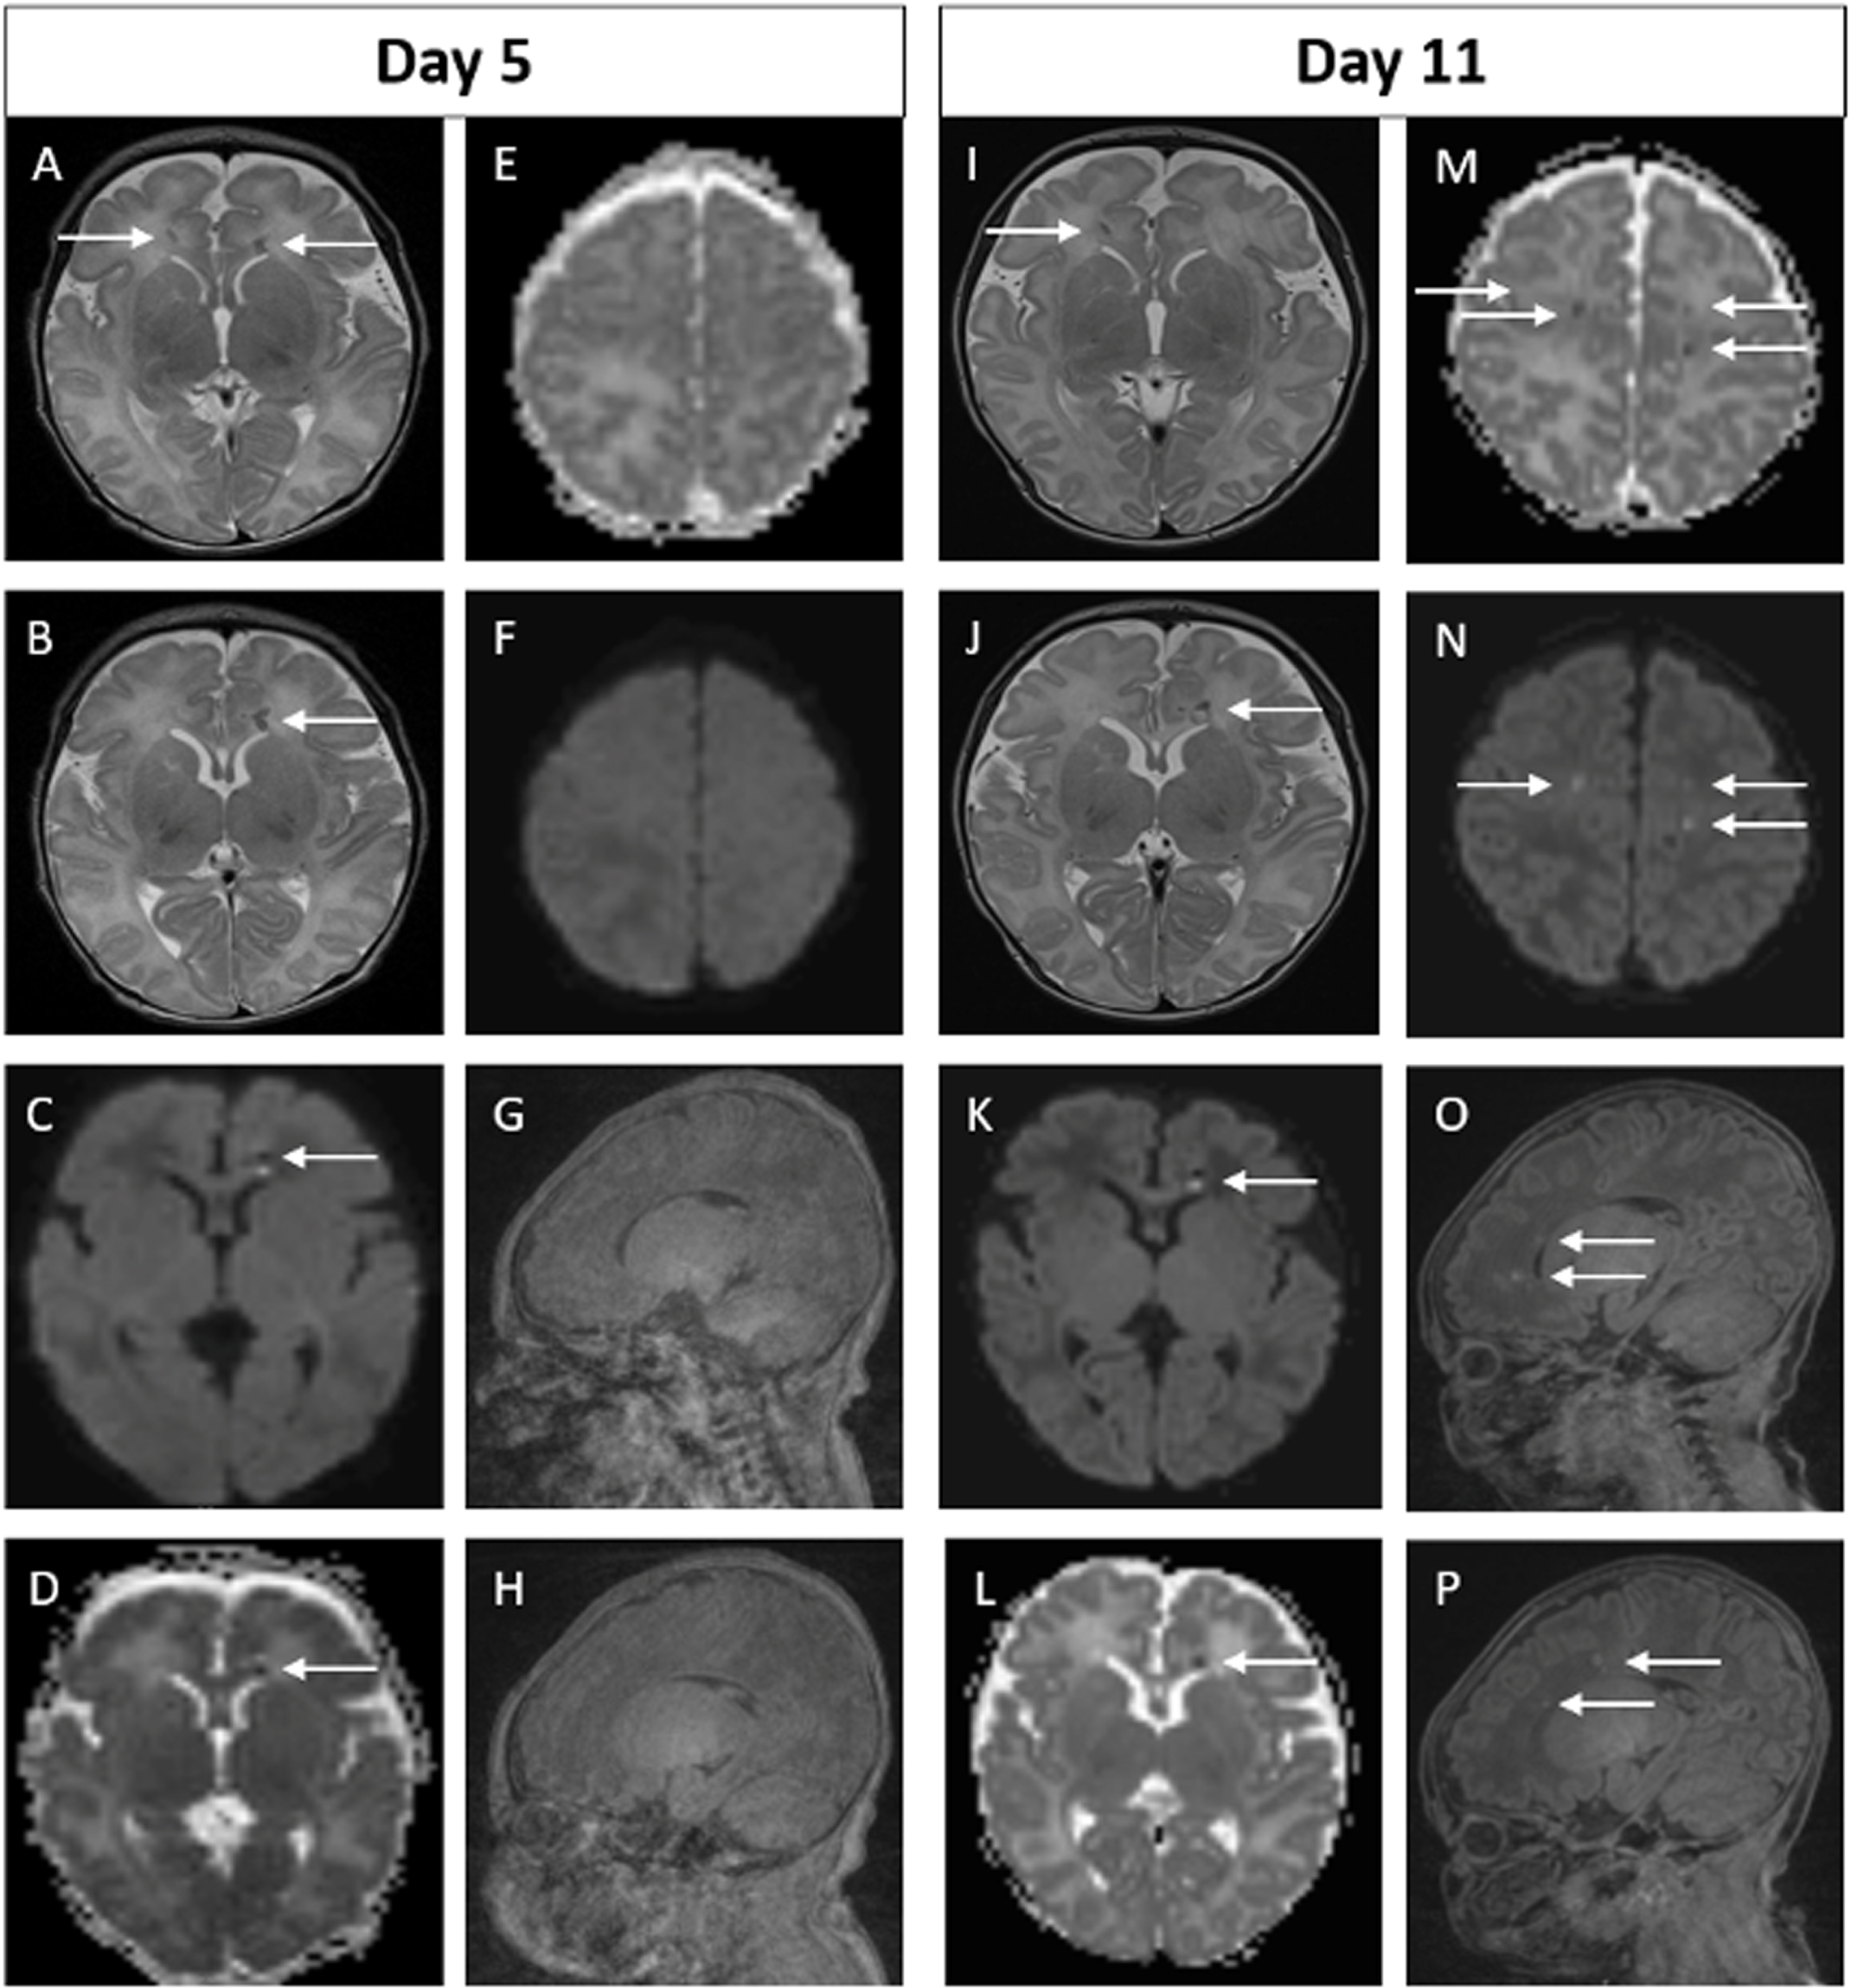 Example of MRI images of abnormal early scan and evolved abnormalities on the late scan. Images A-H on Day 5. Images I-P on Day 11. In the early scan, punctate foci of signal abnormality are seen bilaterally in the frontal periventricular white matter on the axial T2 weighted image (A and B) and on DWI (C and D). These finds are again seen on the late scan (I-L). In addition, new focal punctate white matter lesions are seen on DWI in the deep bilateral frontal white matter of the centra semiovale (M and N) and in the right and left frontal periventricular white matter on sagittal T1 weighted images (O and P). These findings were not evident on the early scan (E-H).